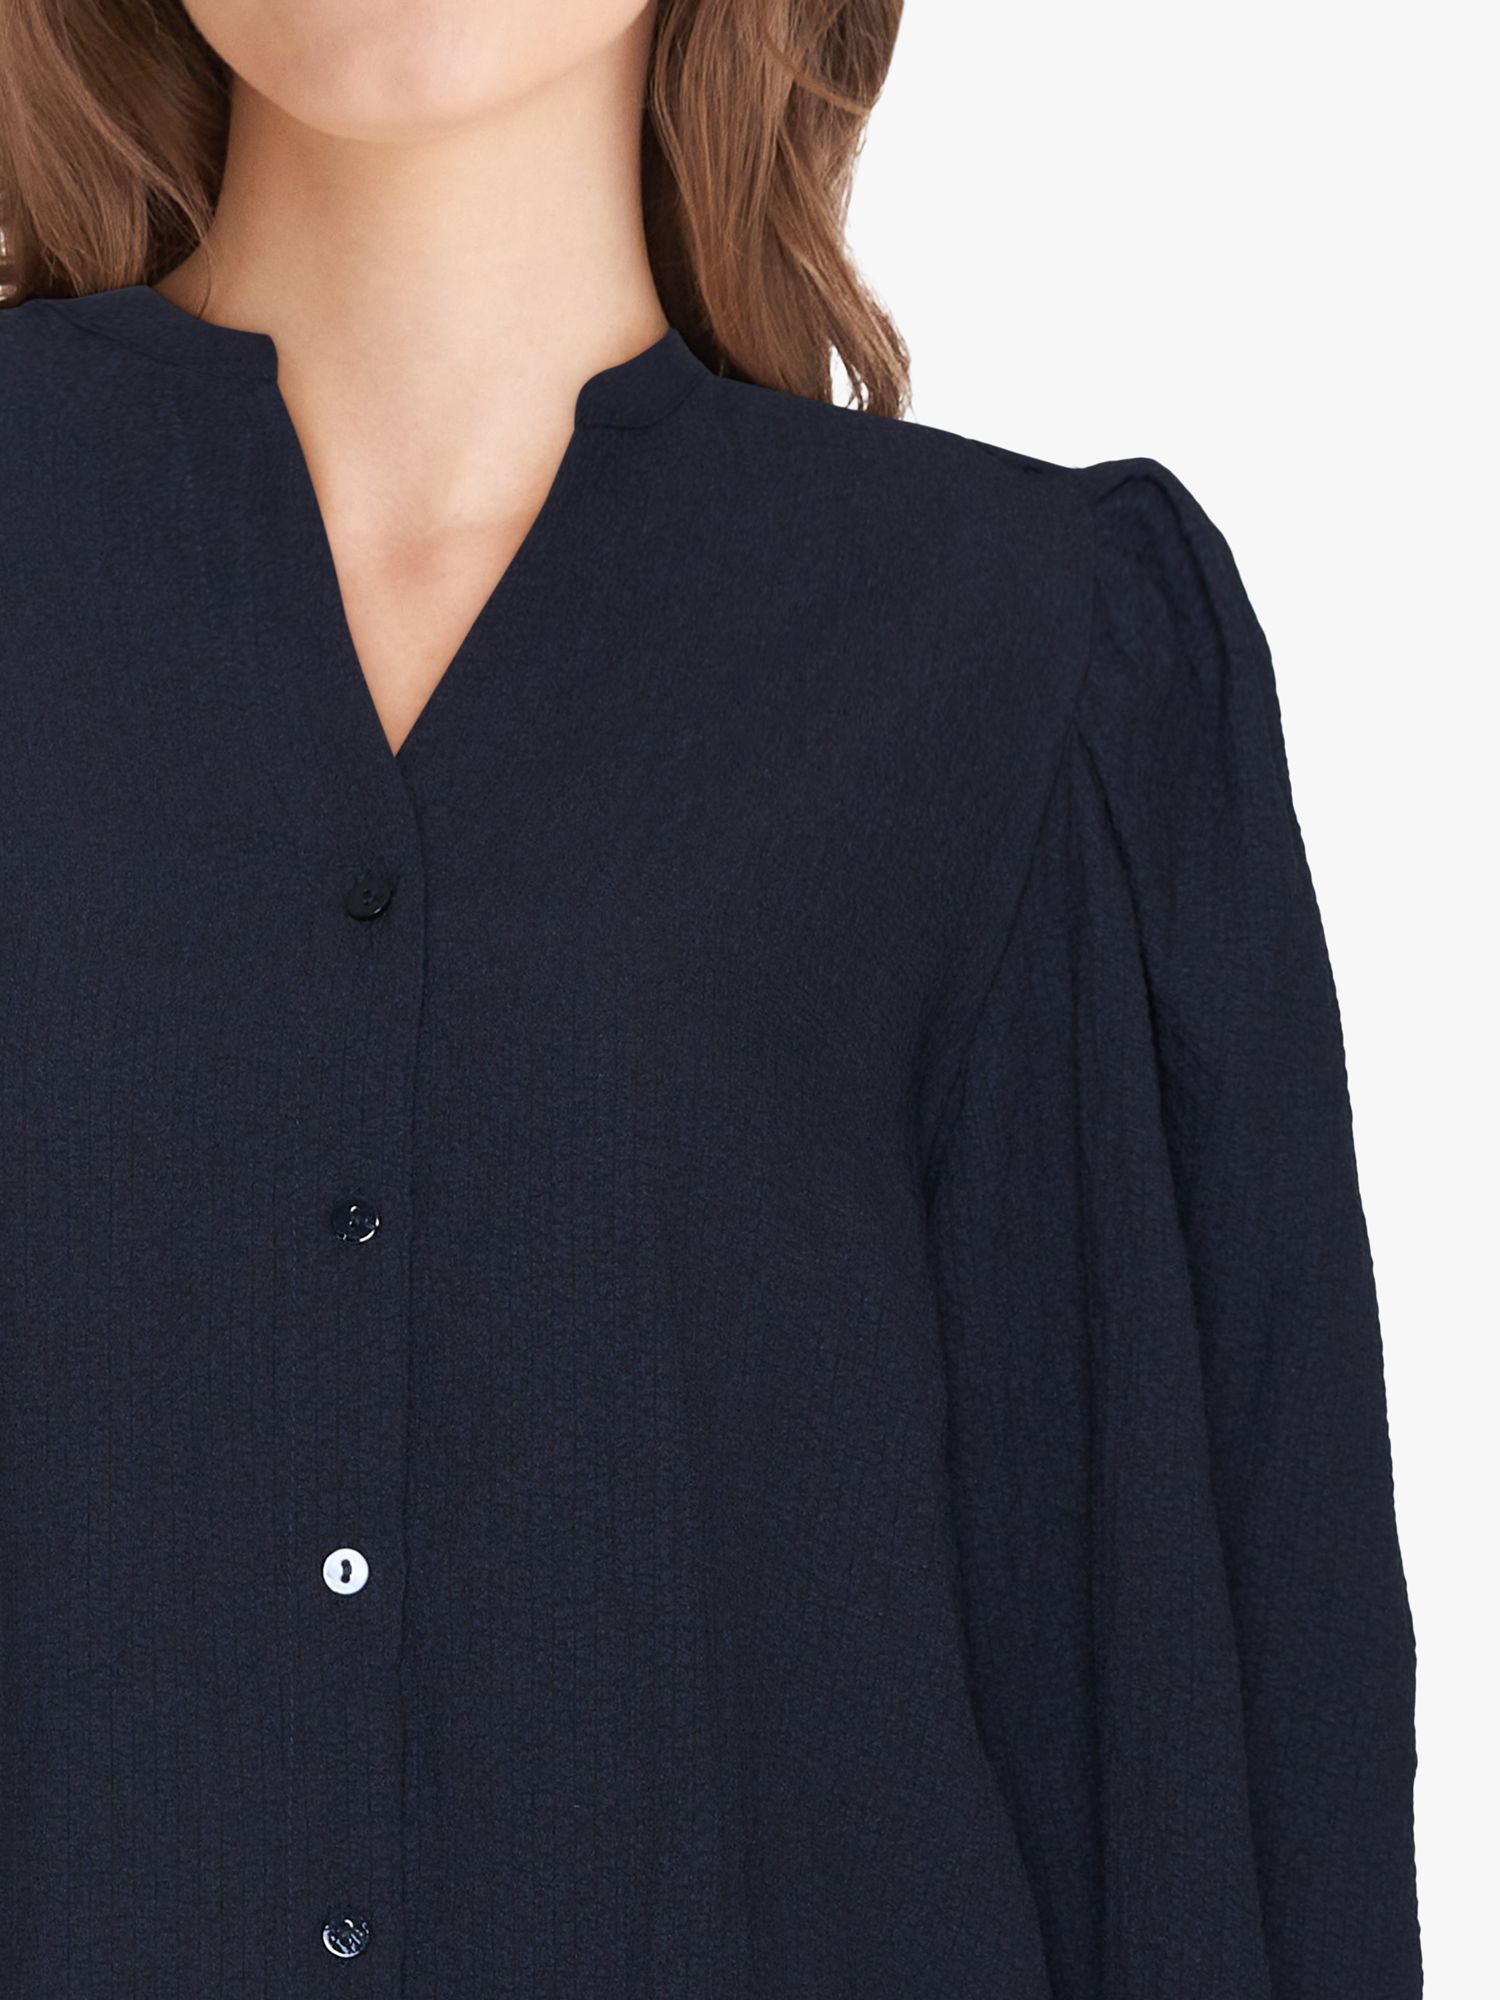 Buy Sisters Point Varia Loose Fitted Soft Shirt, Black Online at johnlewis.com